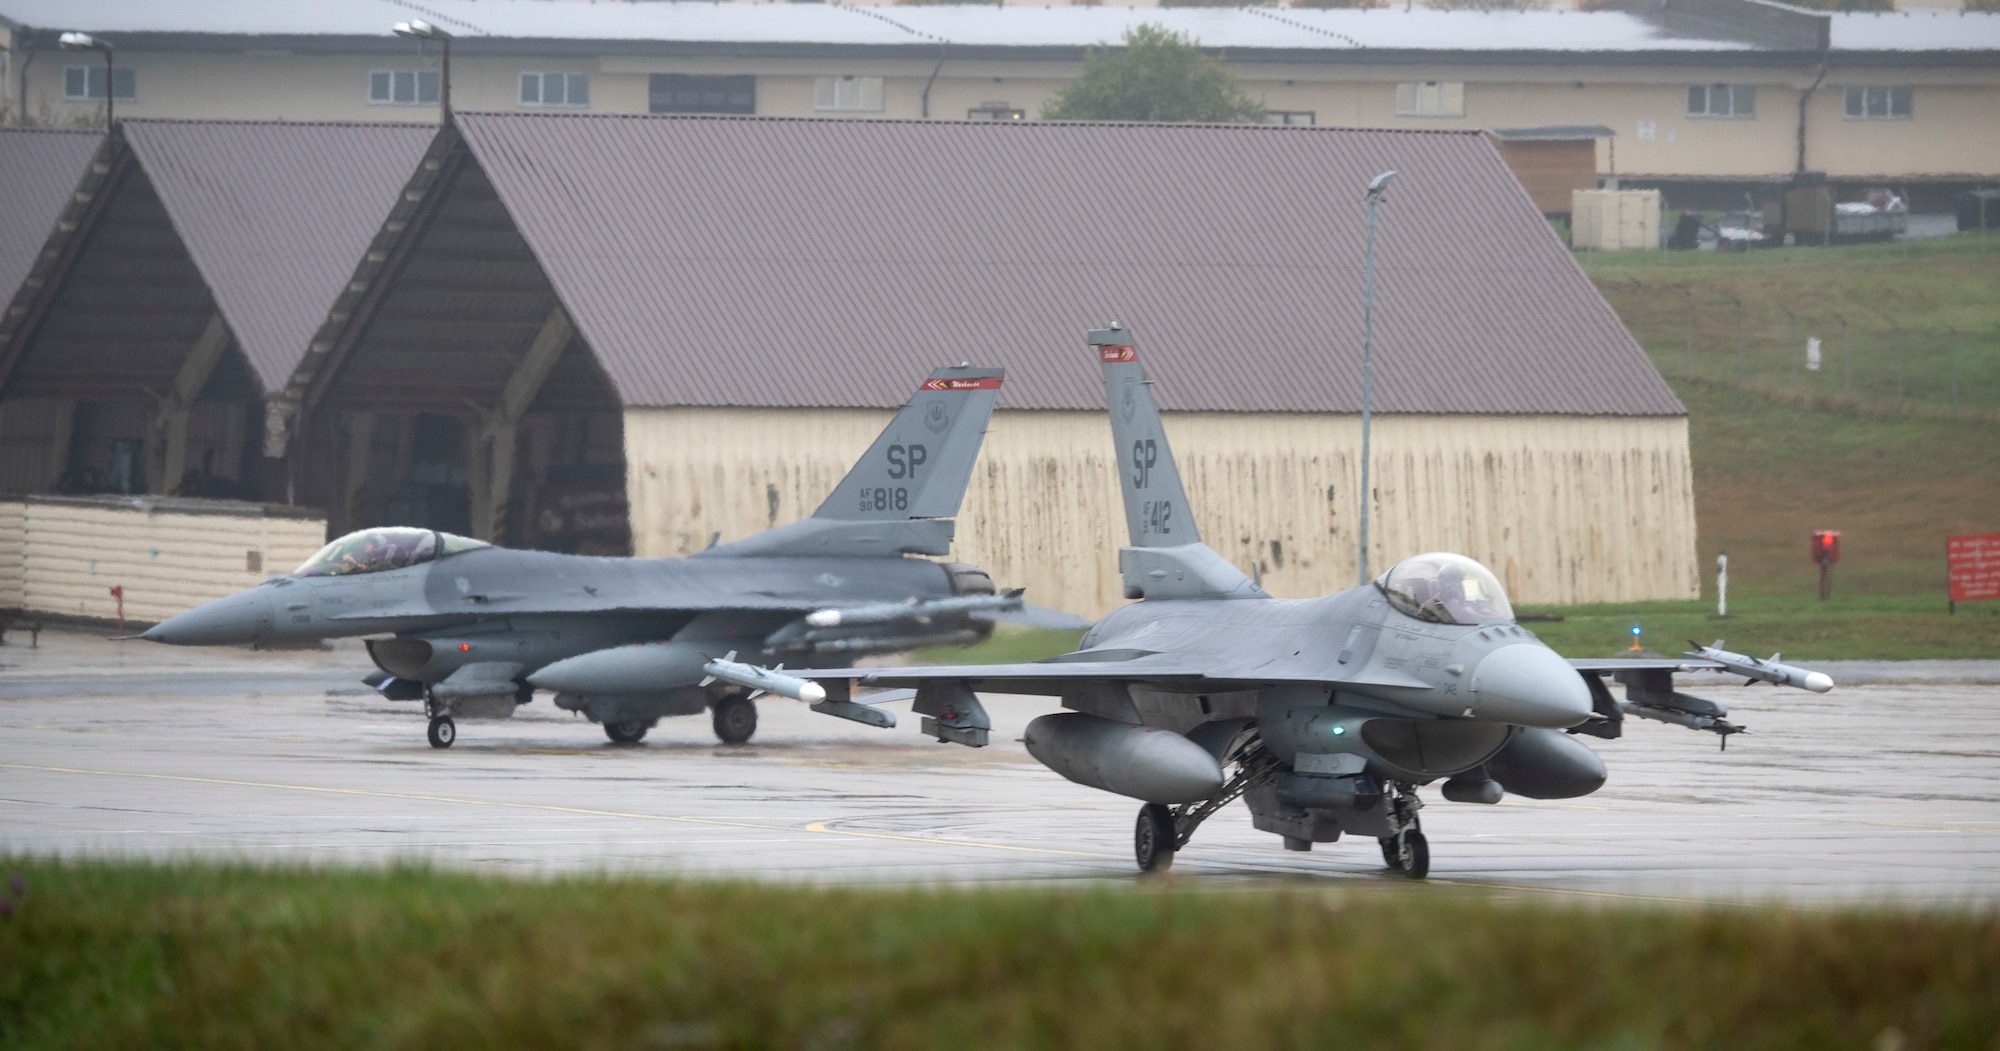 The training event exhibited the 52nd Fighter Wing's ability to generate large number of aircraft, and is an effective deterrent to threats by demonstrating a show of force.